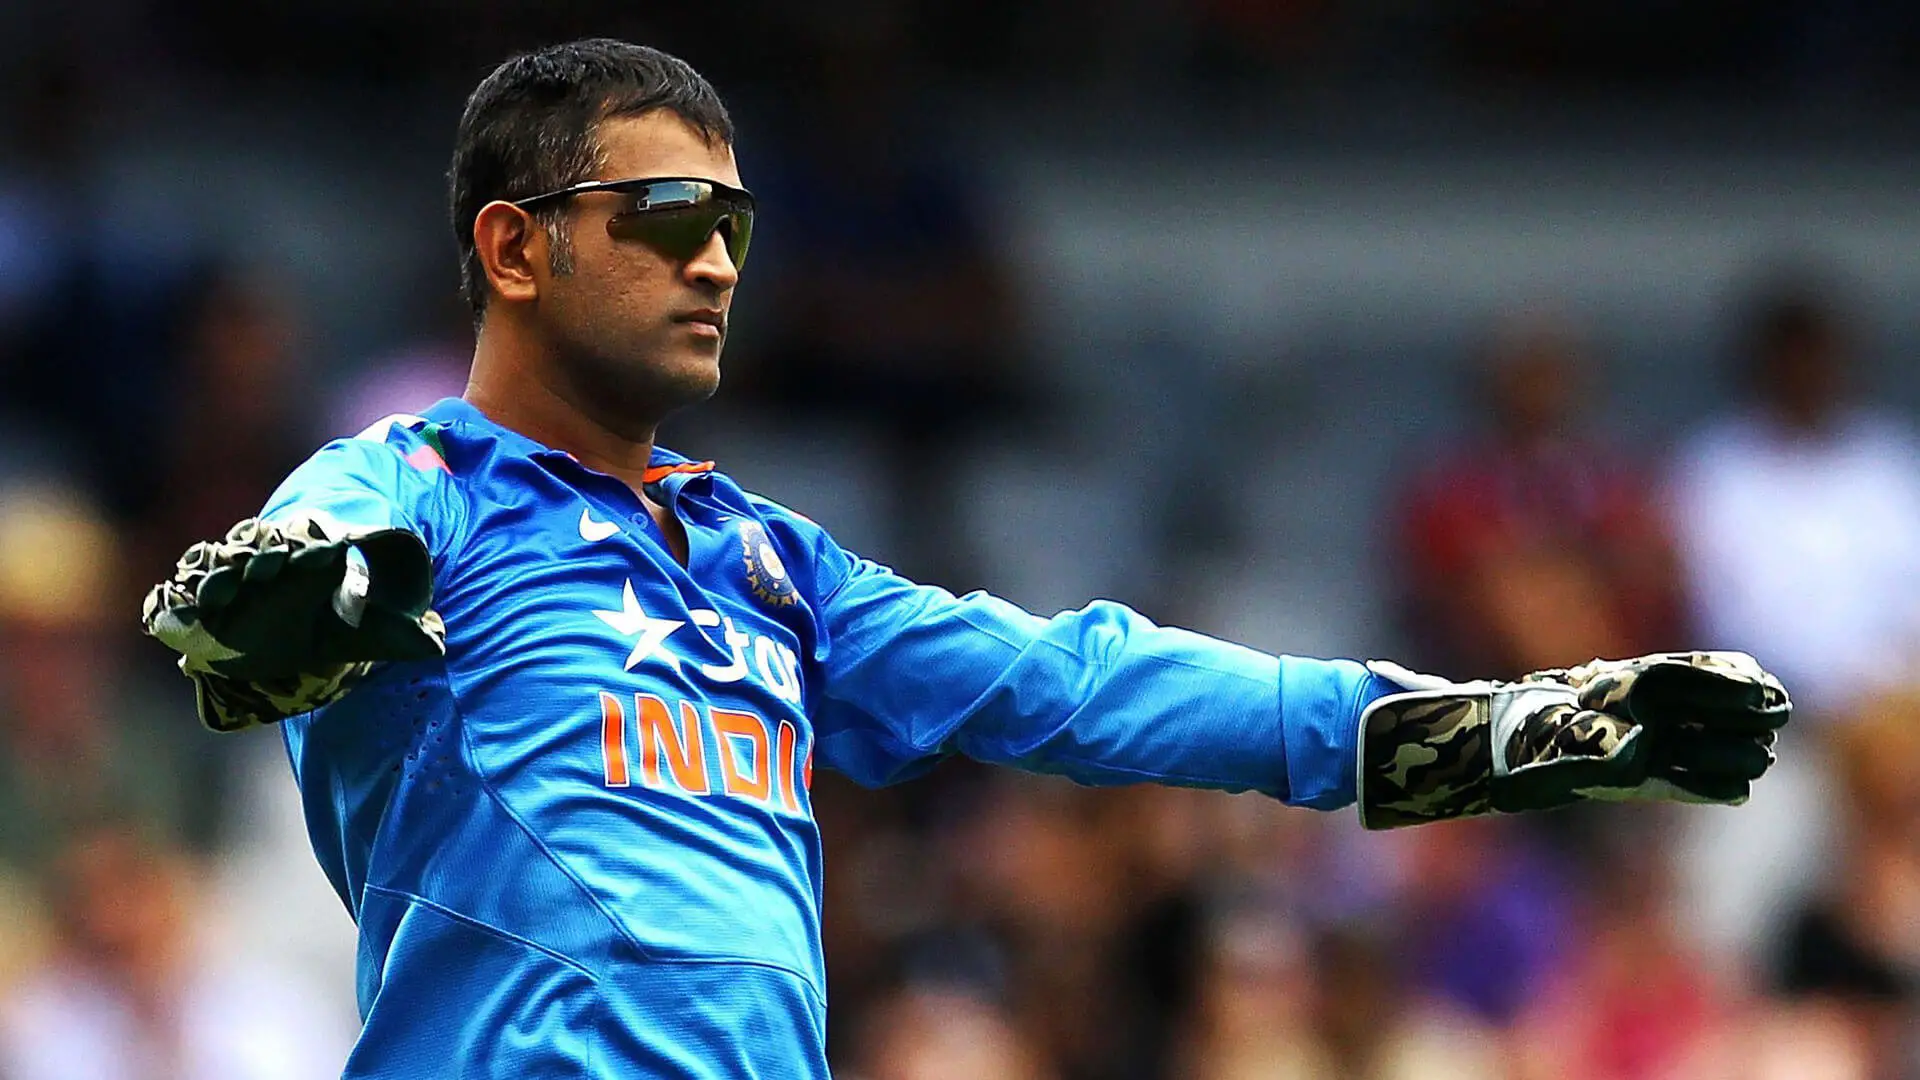 MSD LOVER'S | Ms dhoni wallpapers, Cricket wallpapers, Dhoni wallpapers